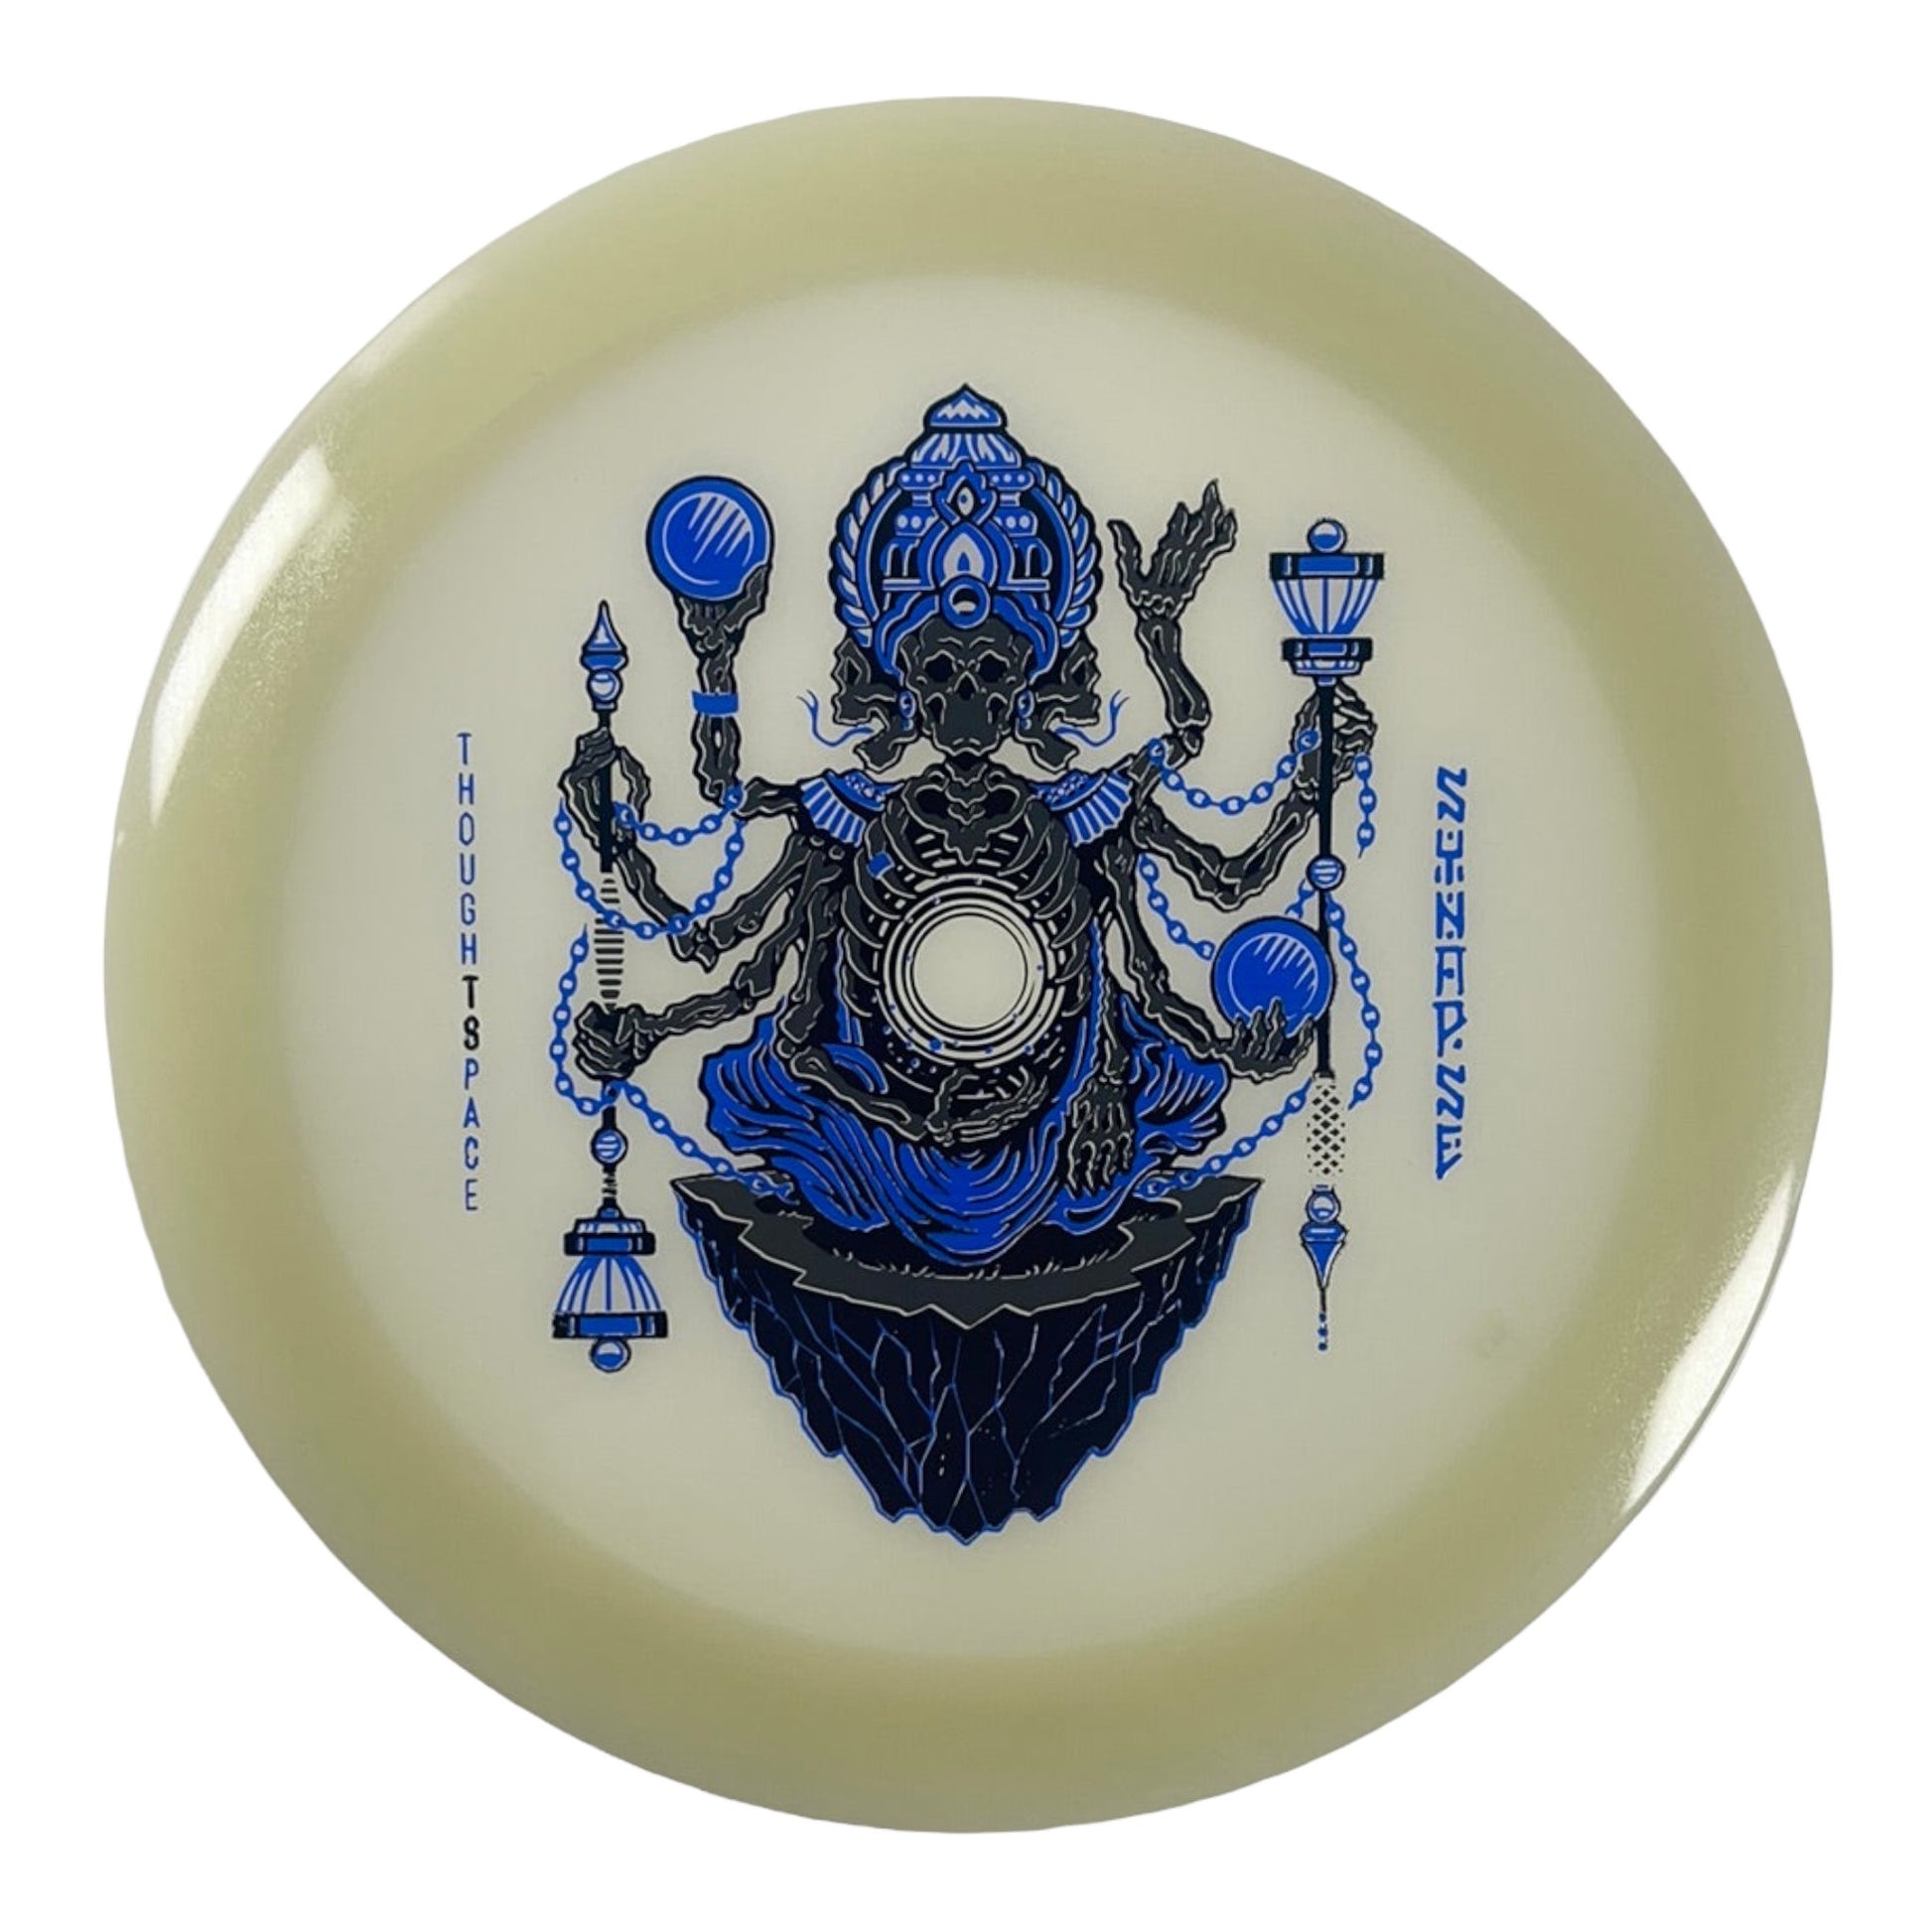 Thought Space Athletics Synapse | Glow | Blue/Black 172-175g Disc Golf